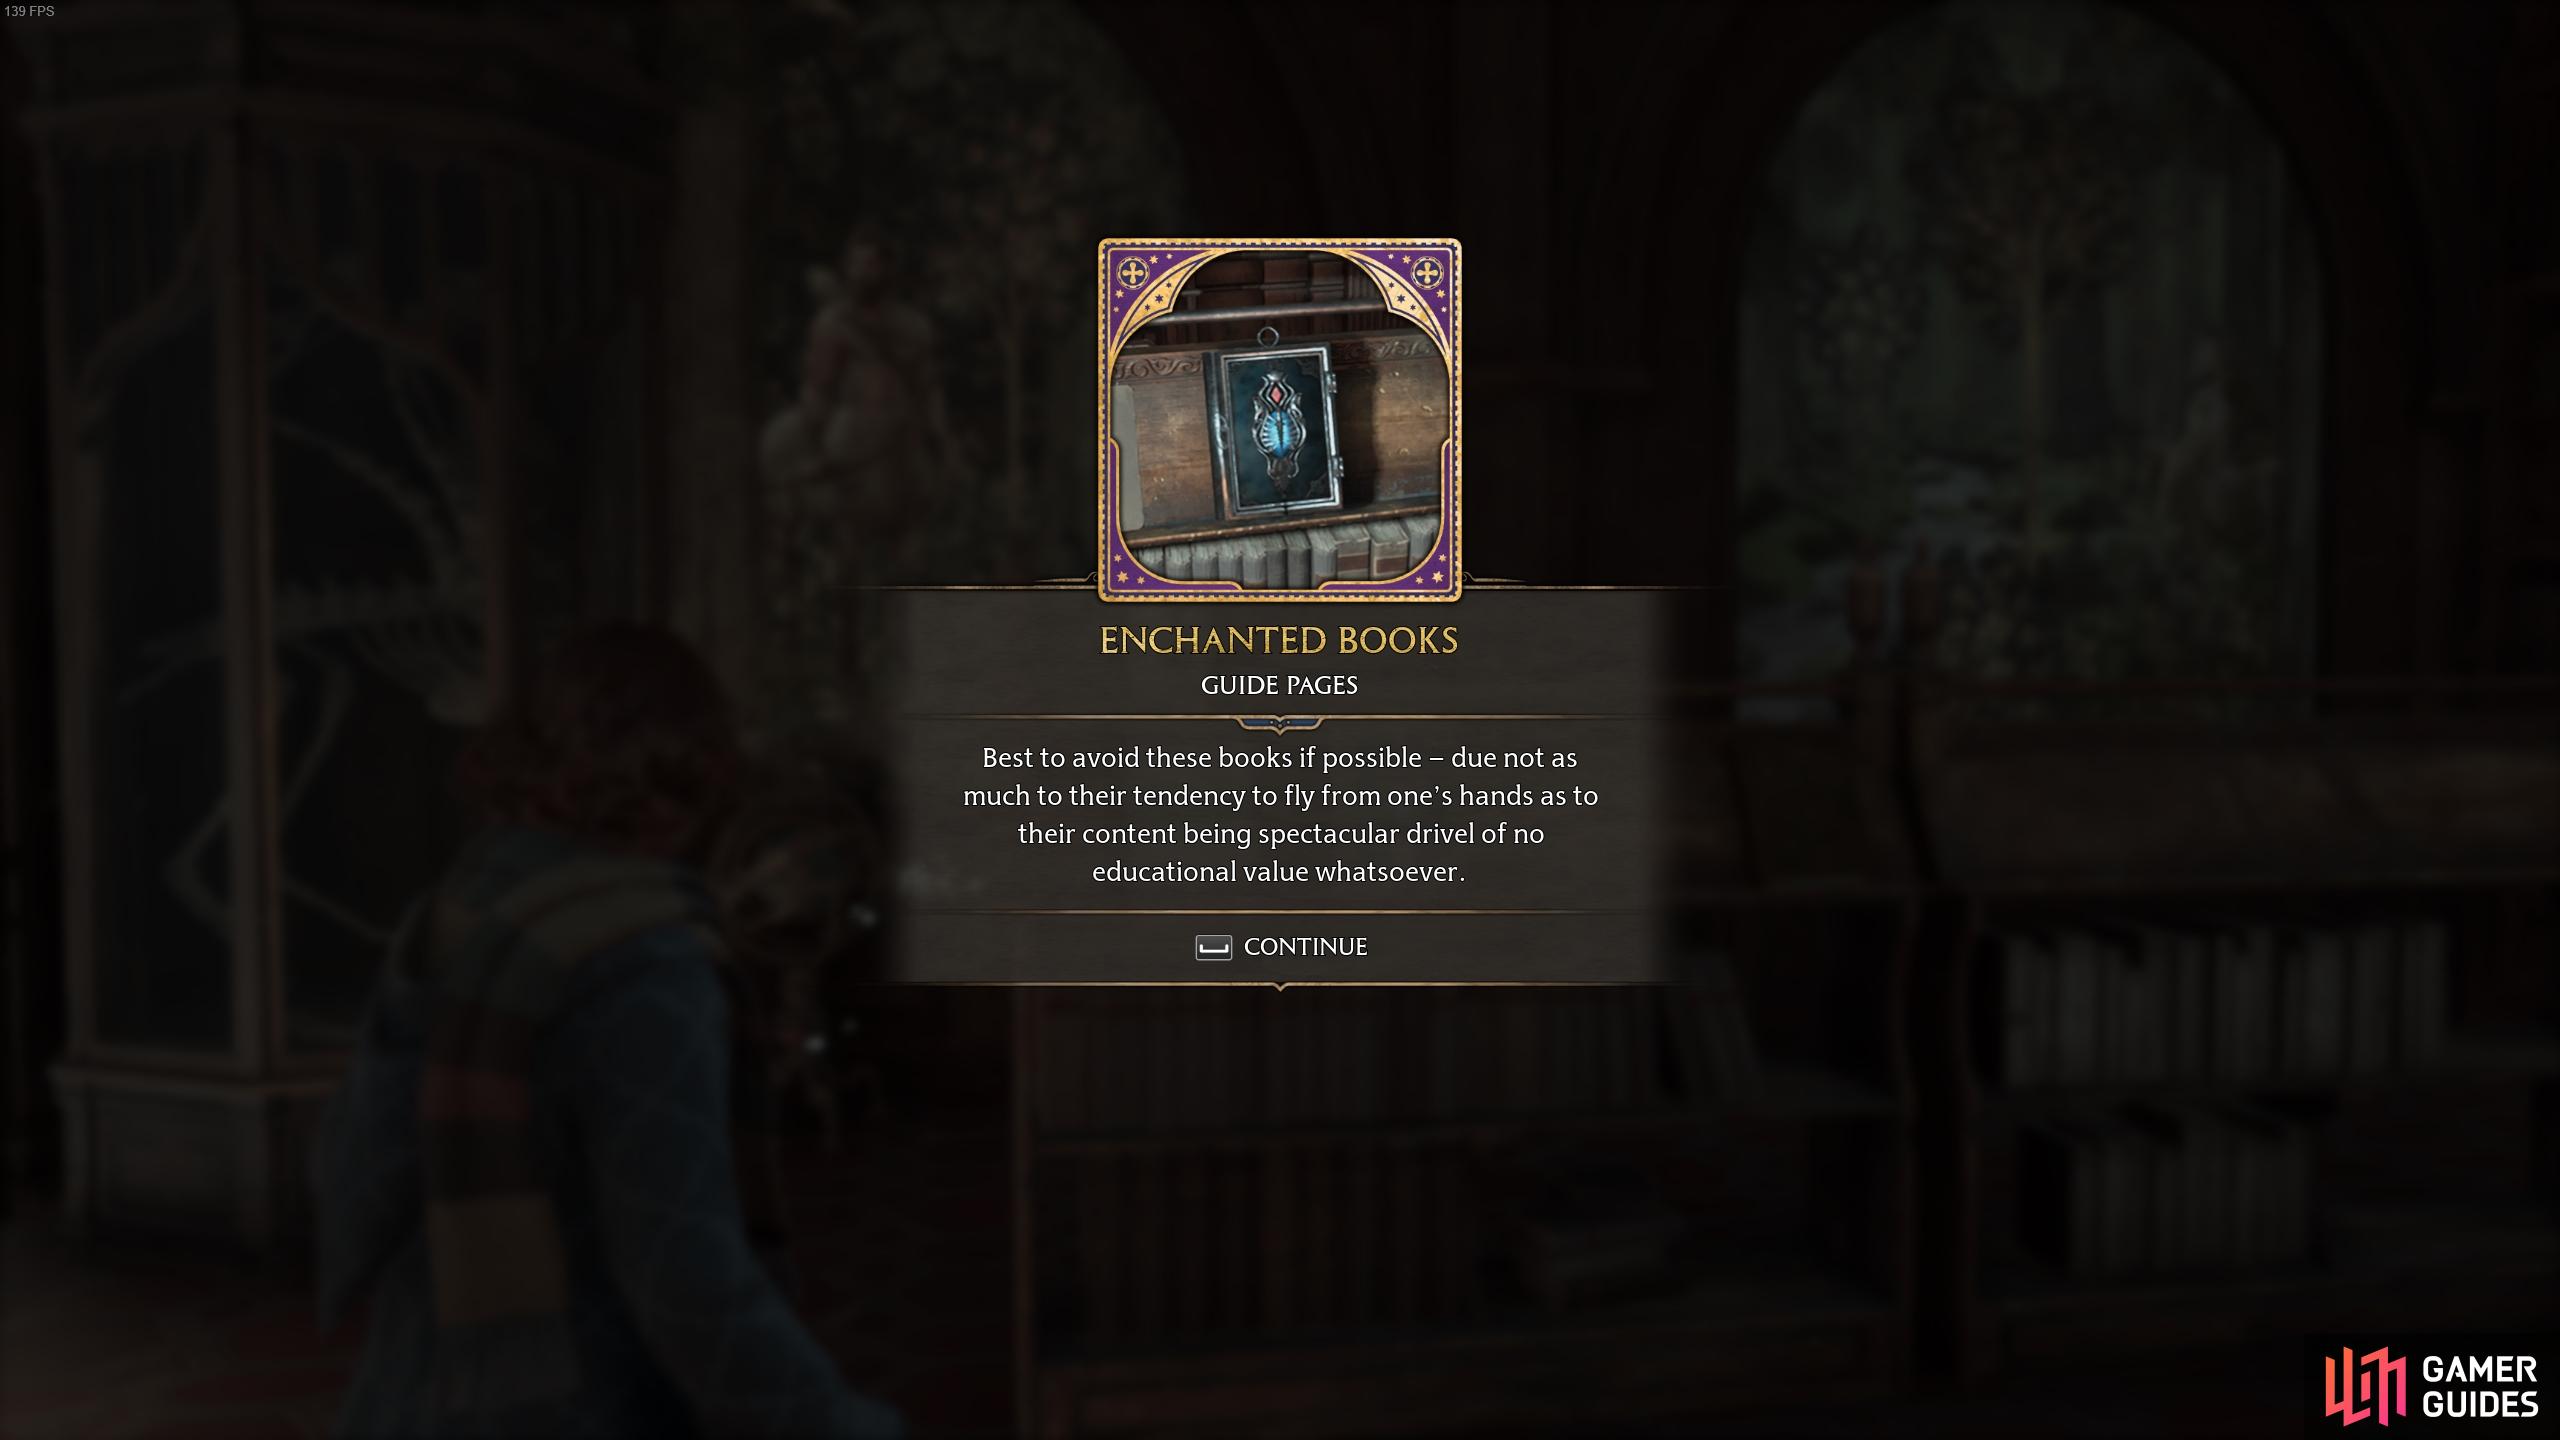 The description for the Enchanted Books page.